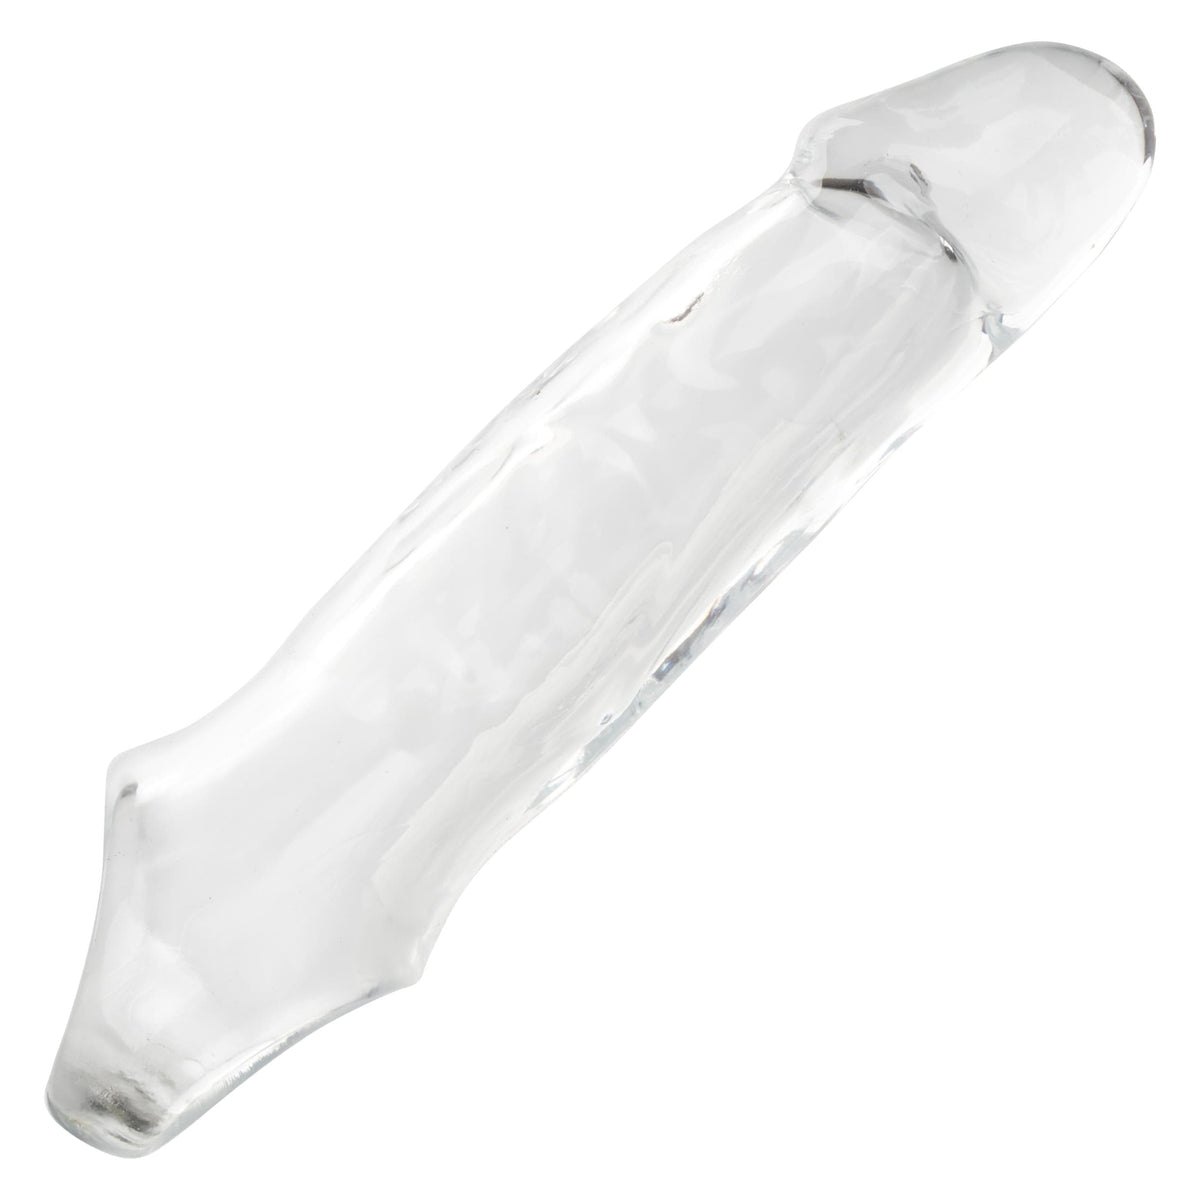 performance maxx clear extension 5 5 inch clear